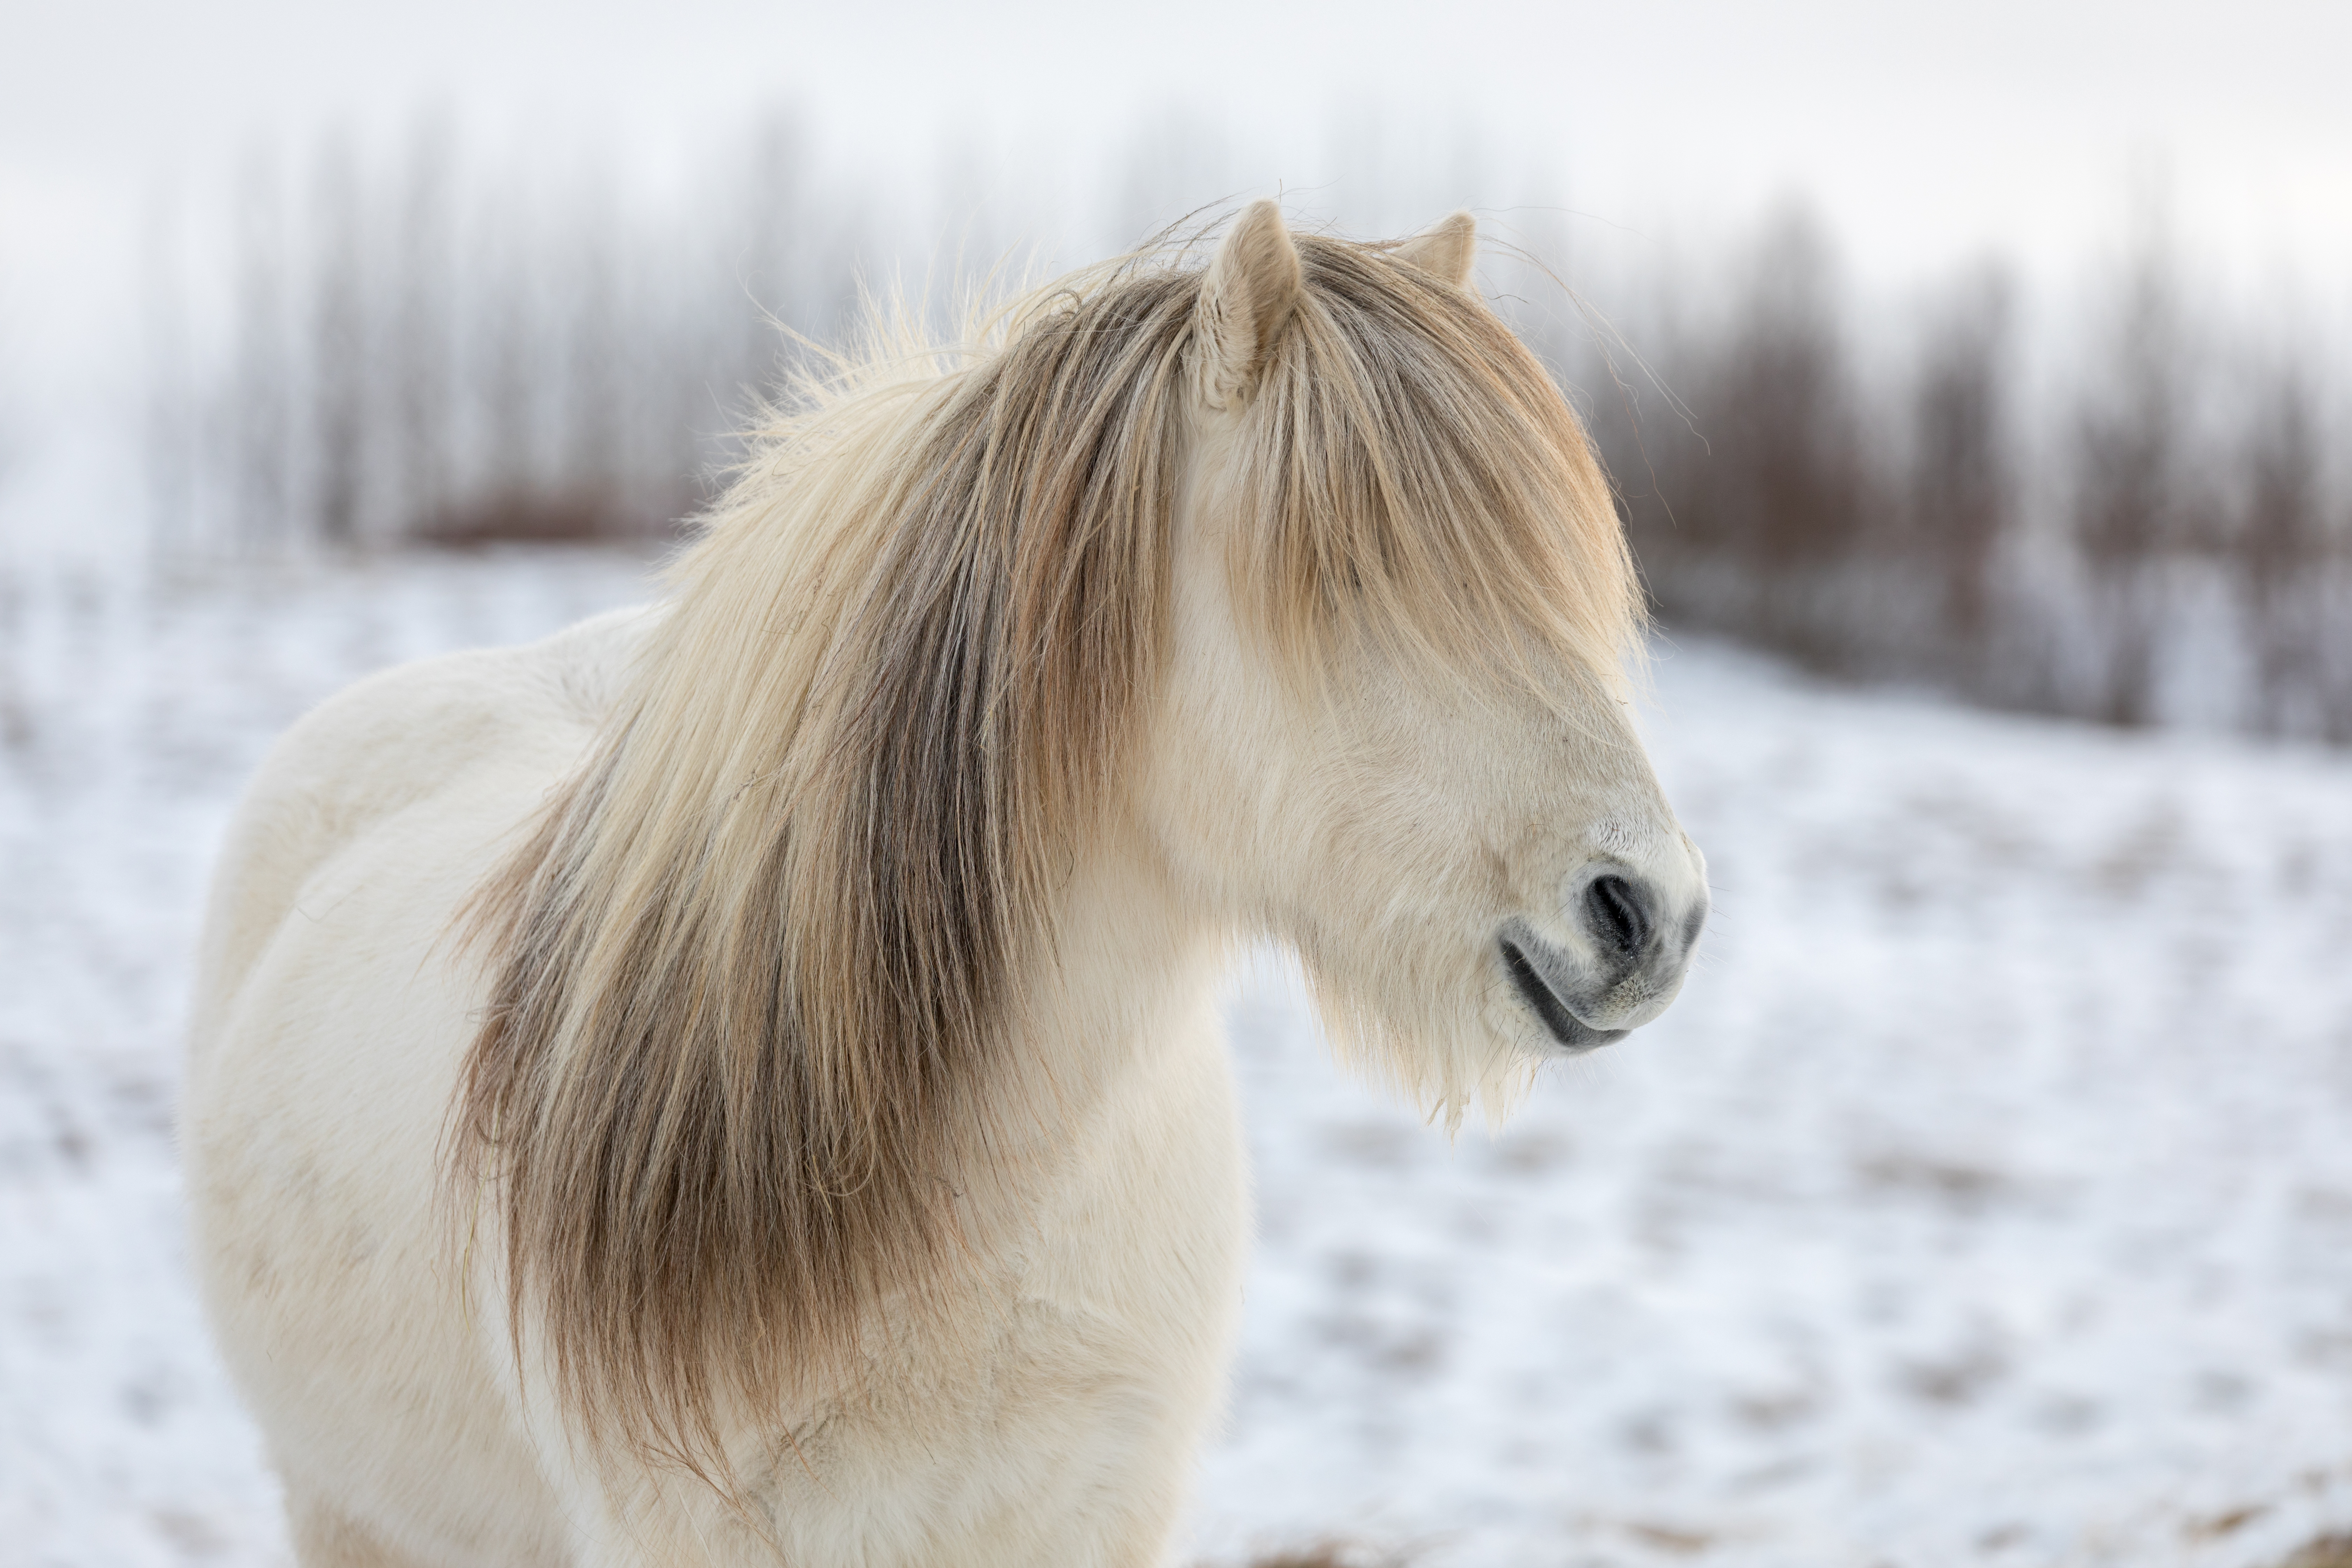 A very fuzzy white horse with a long forelock and thick mane.